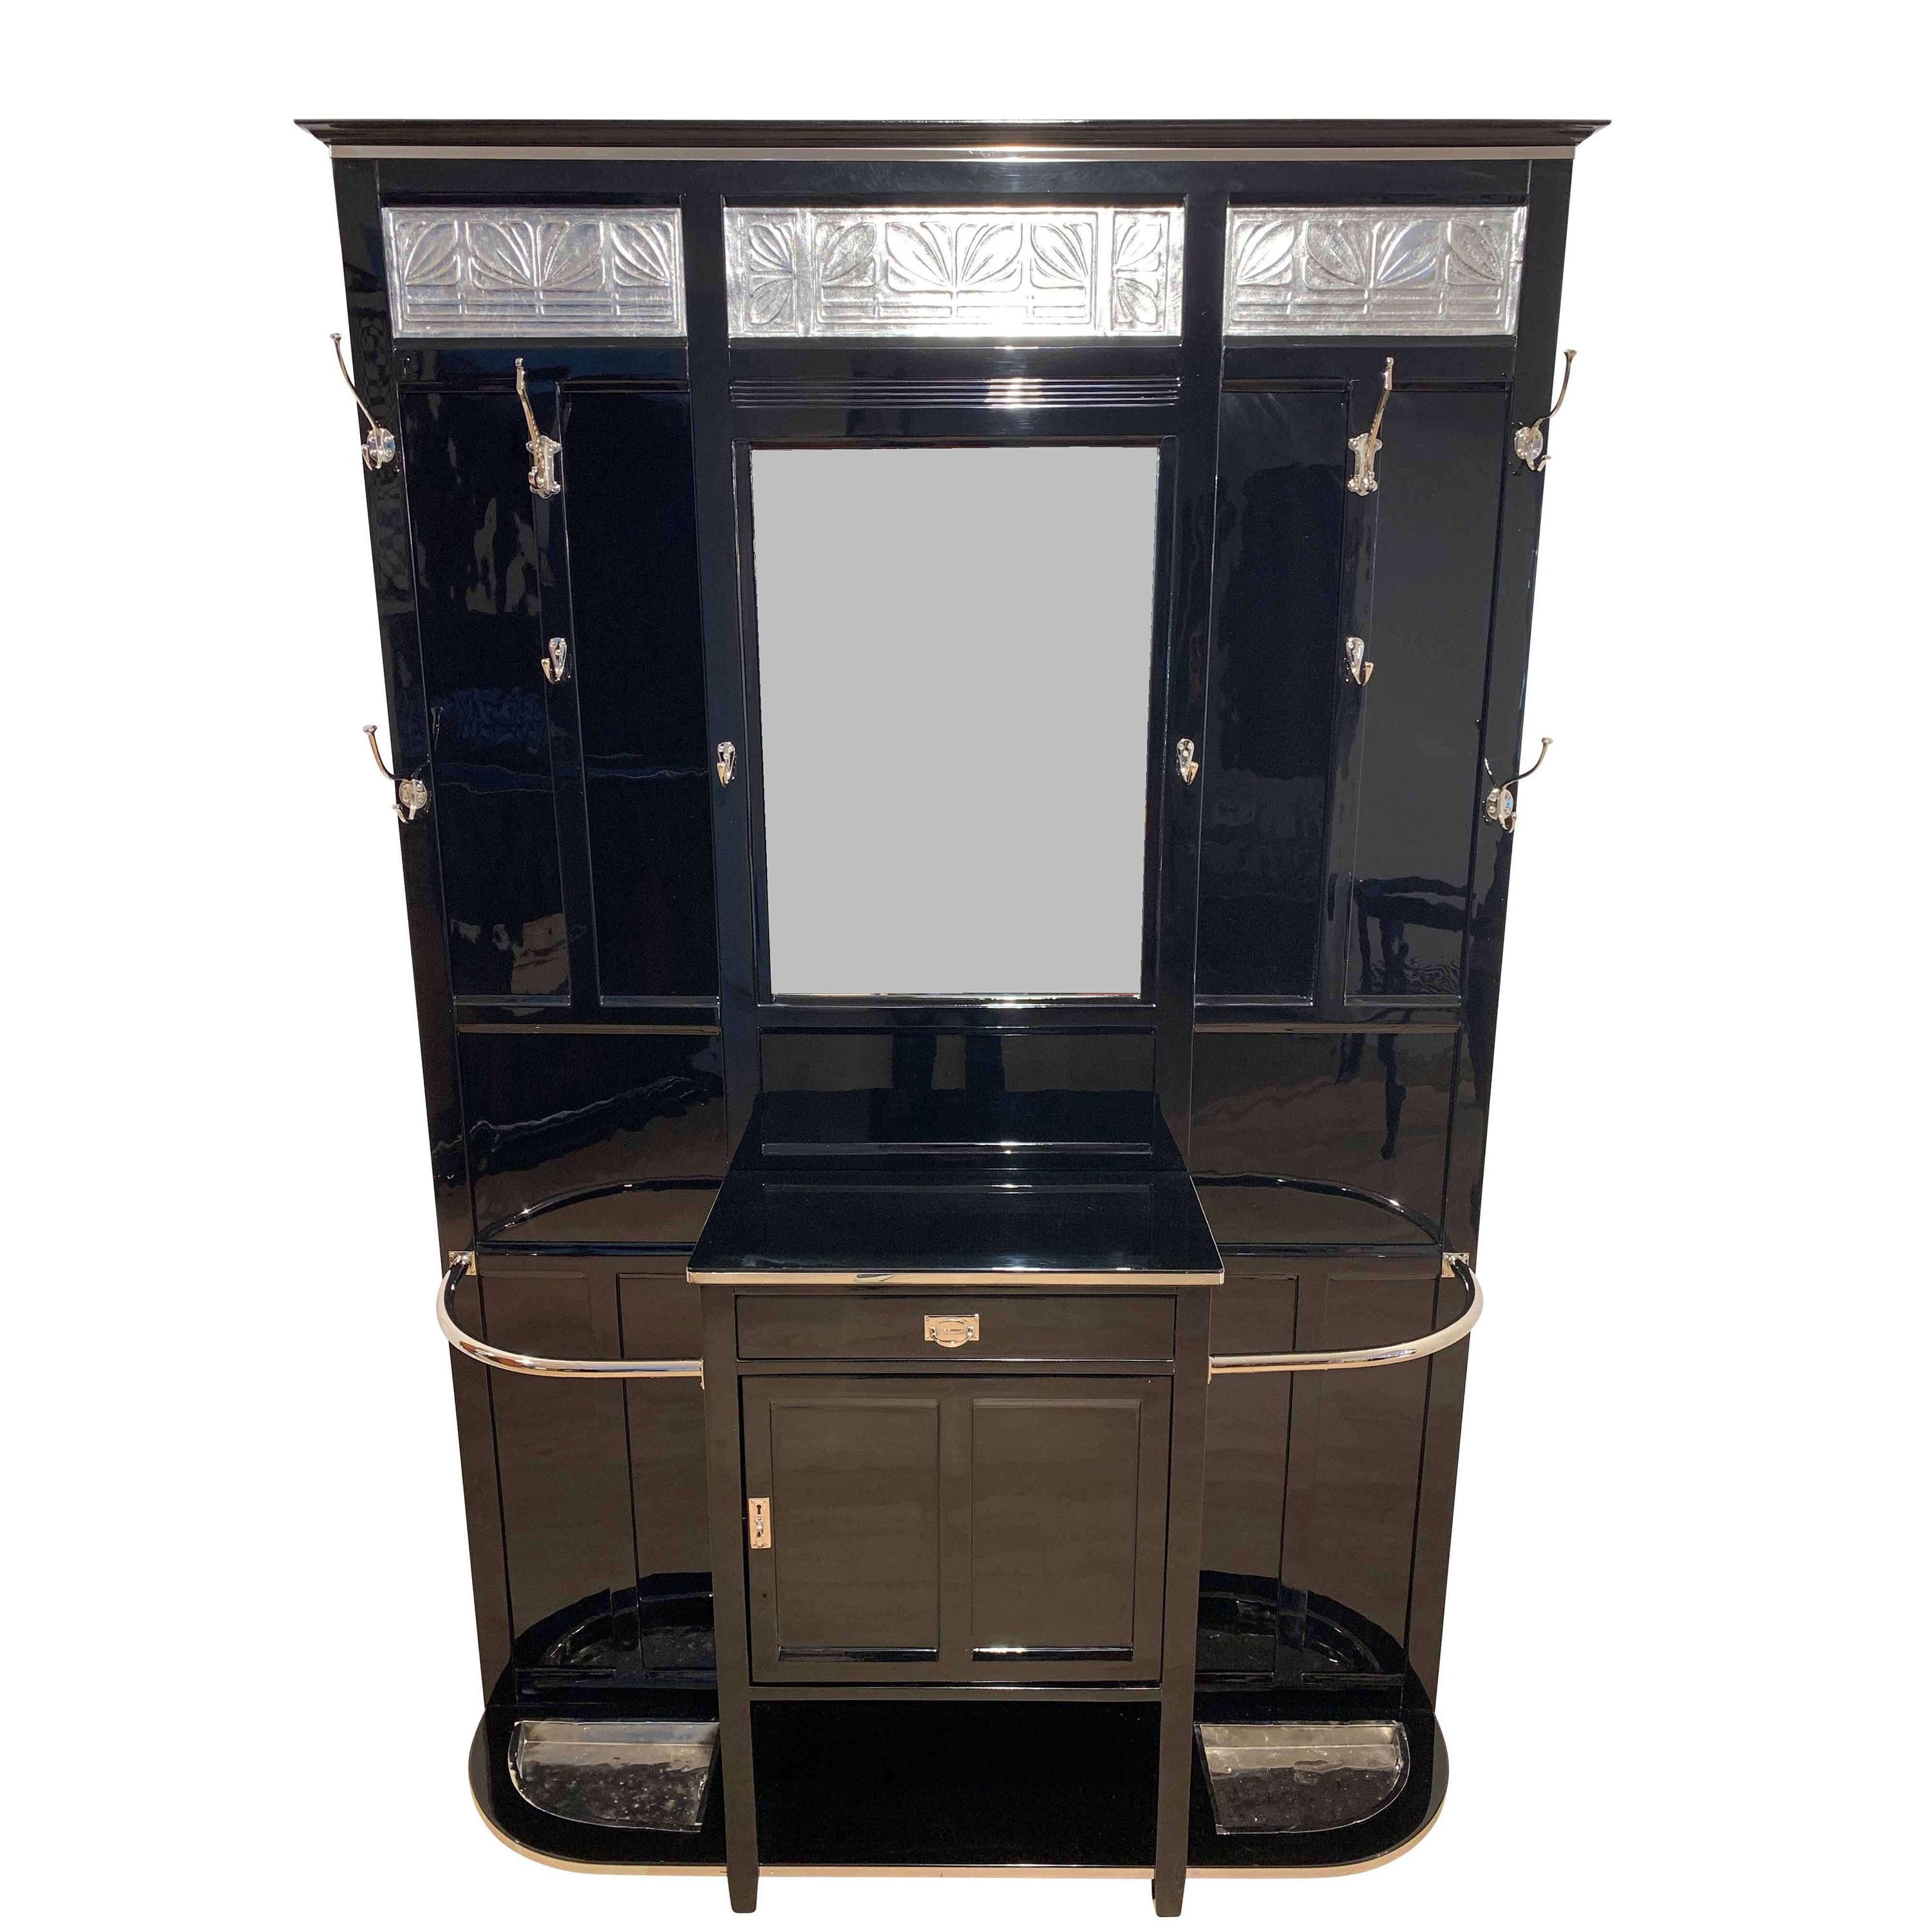 Outstanding, big and original Art Deco wardrobe with mirror from France, circa 1930.

Excellently restored condition. Glossy piano varnish finish in a deep black.
Silver plated leaves decor at the top. All original, newly galvanized (nickel-plated)